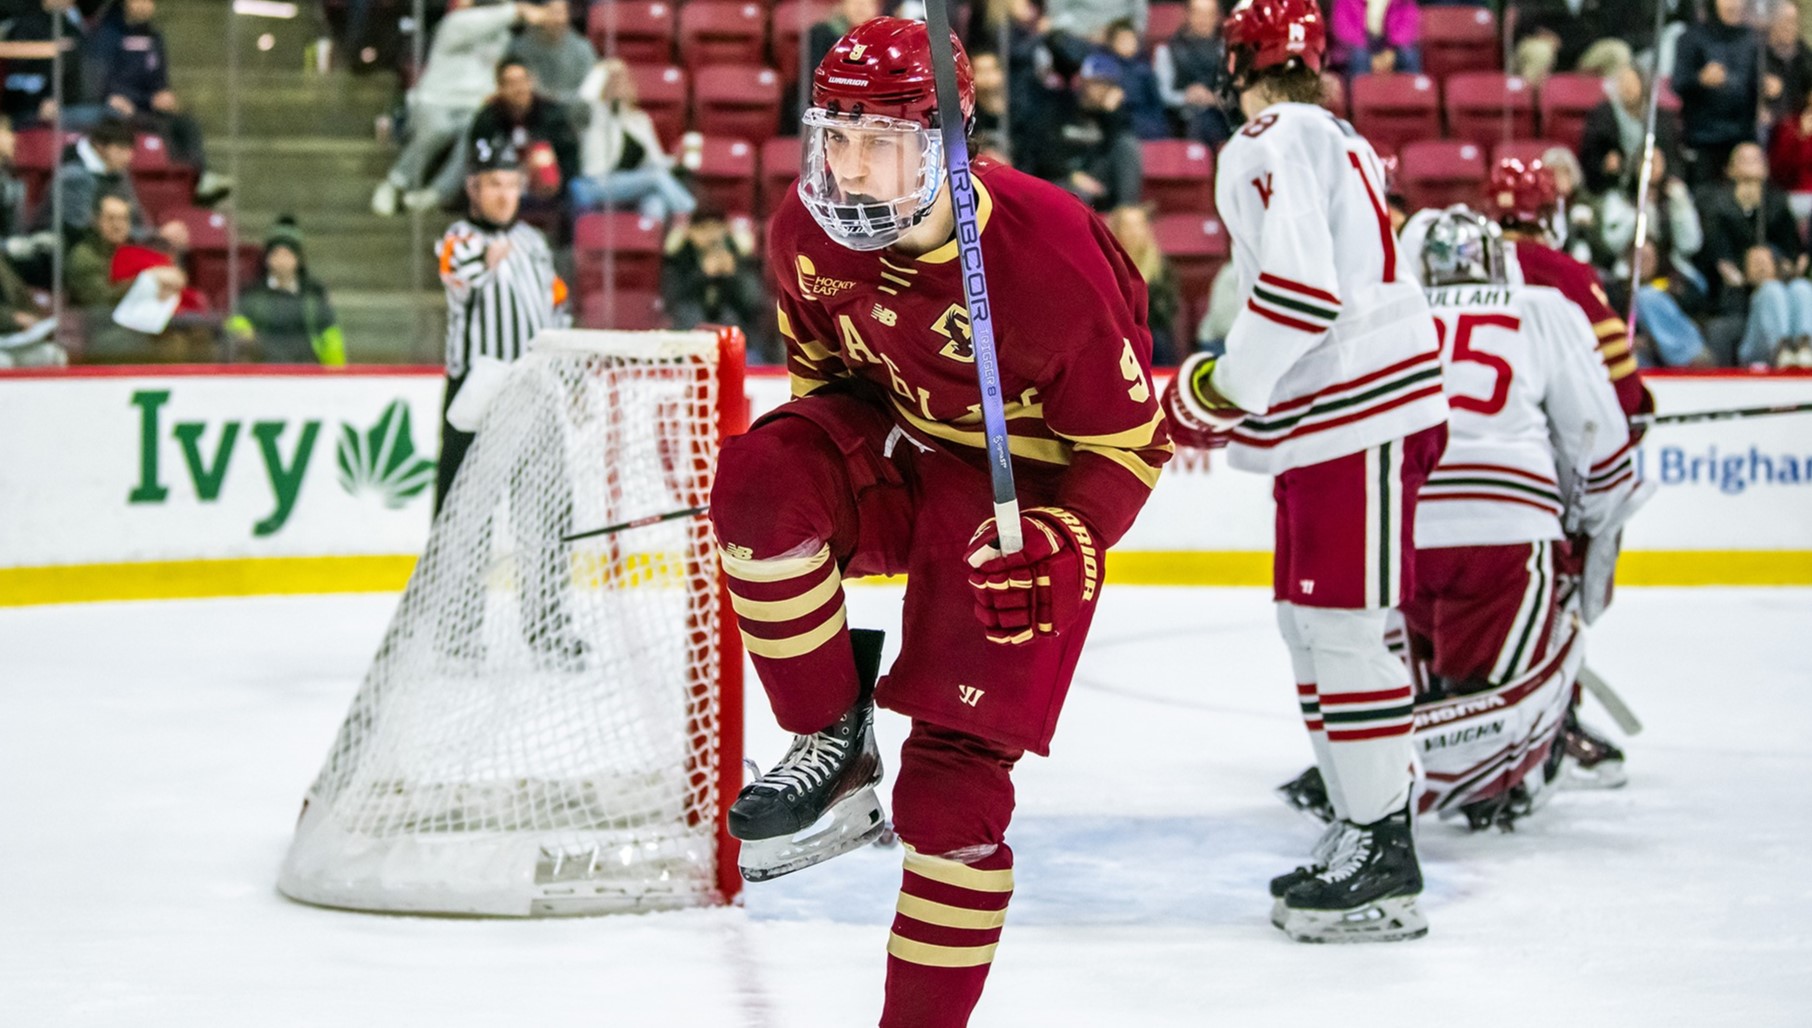 Back in Frozen Four means powerhouse Boston College squad continuing